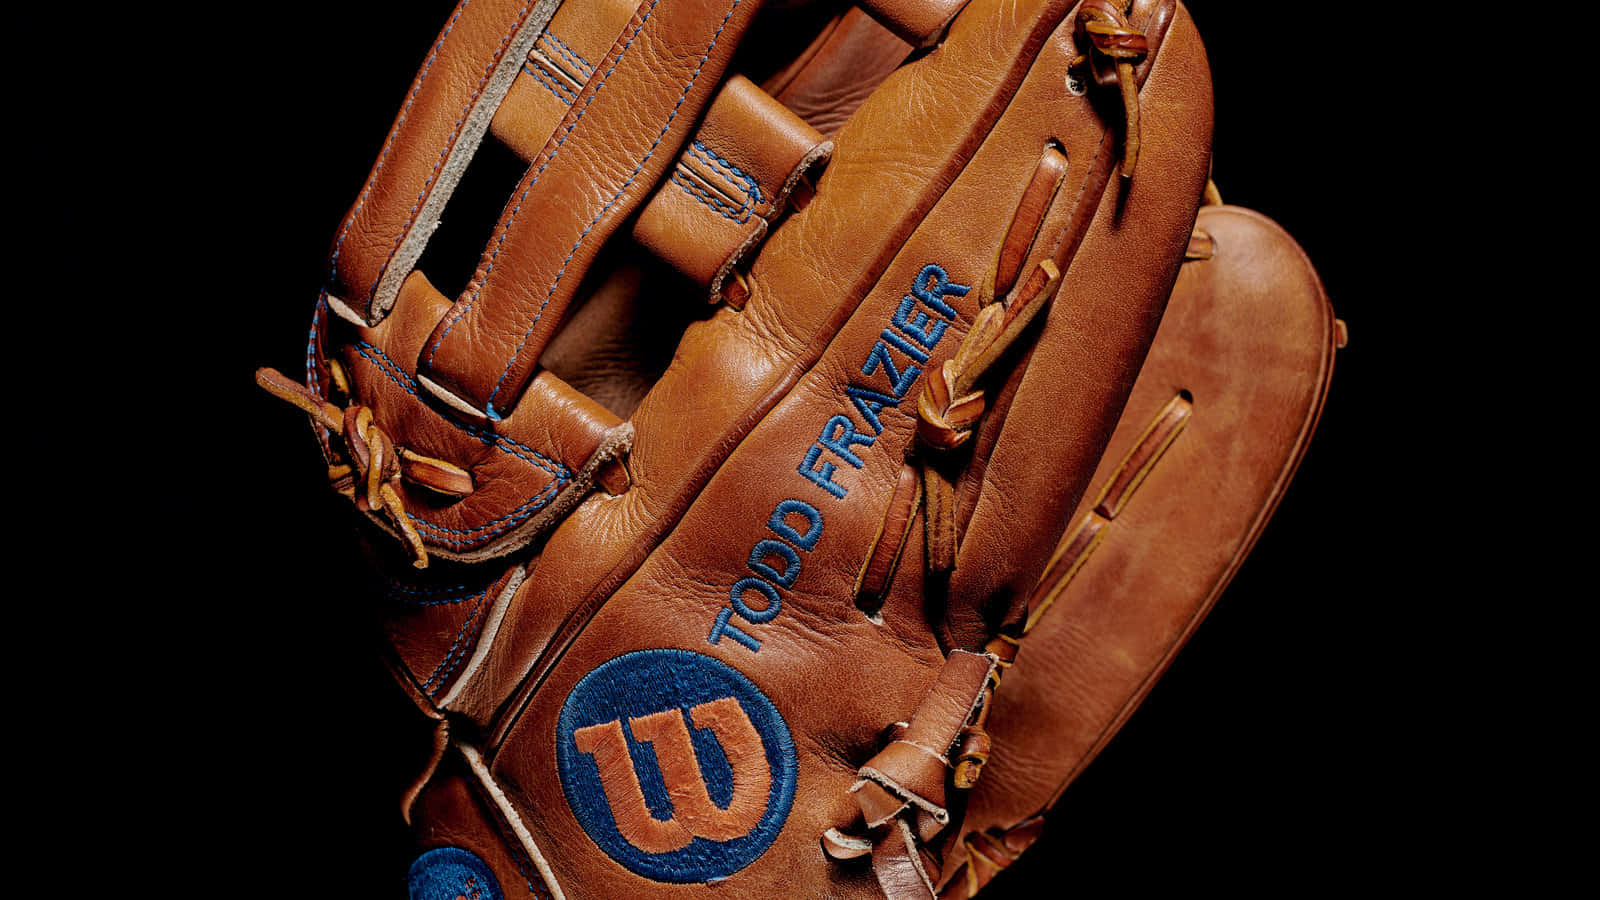 Top-quality Baseball Gloves lined up for the Game Wallpaper